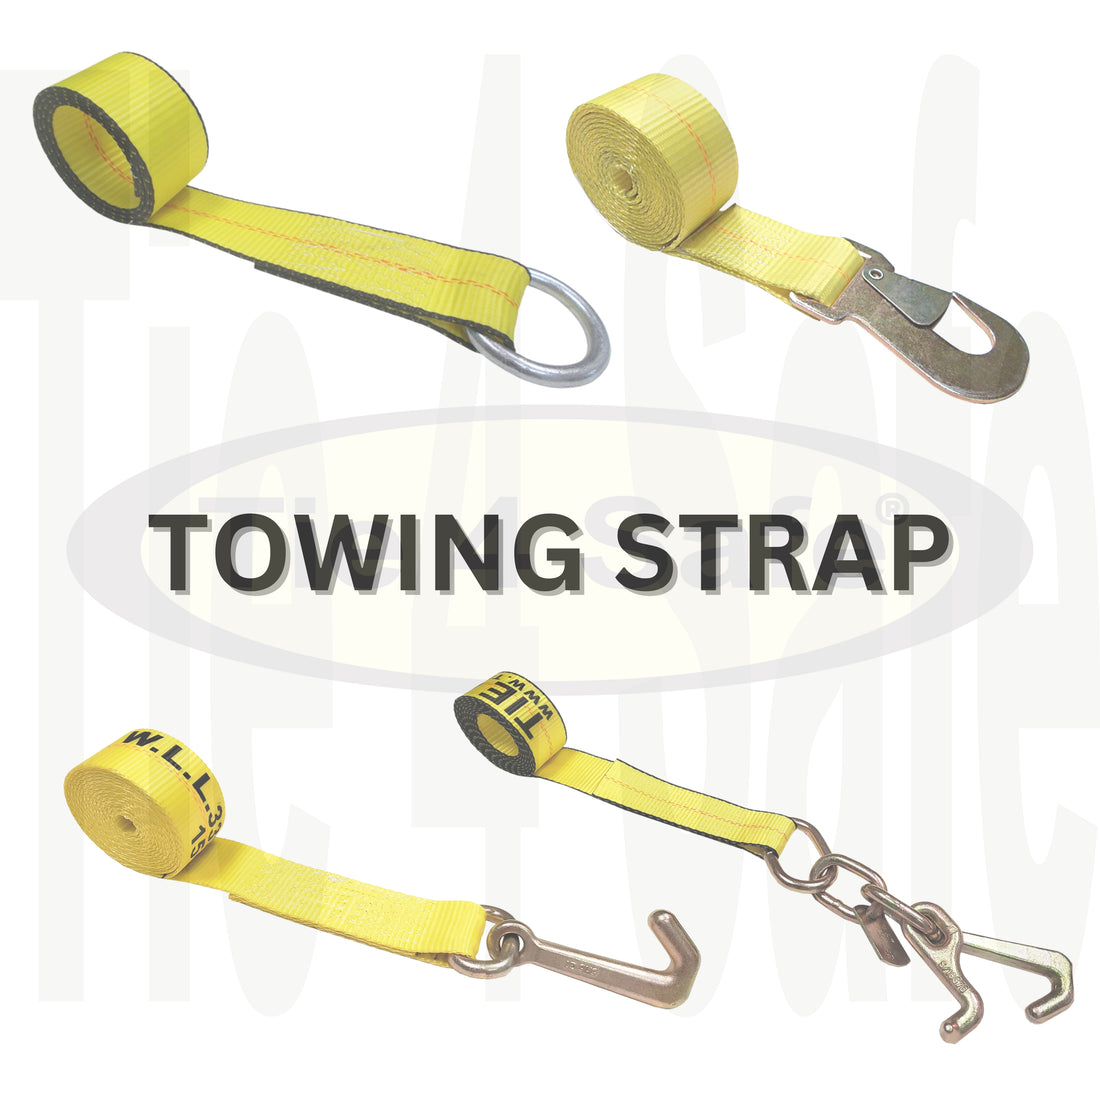 Towing Straps